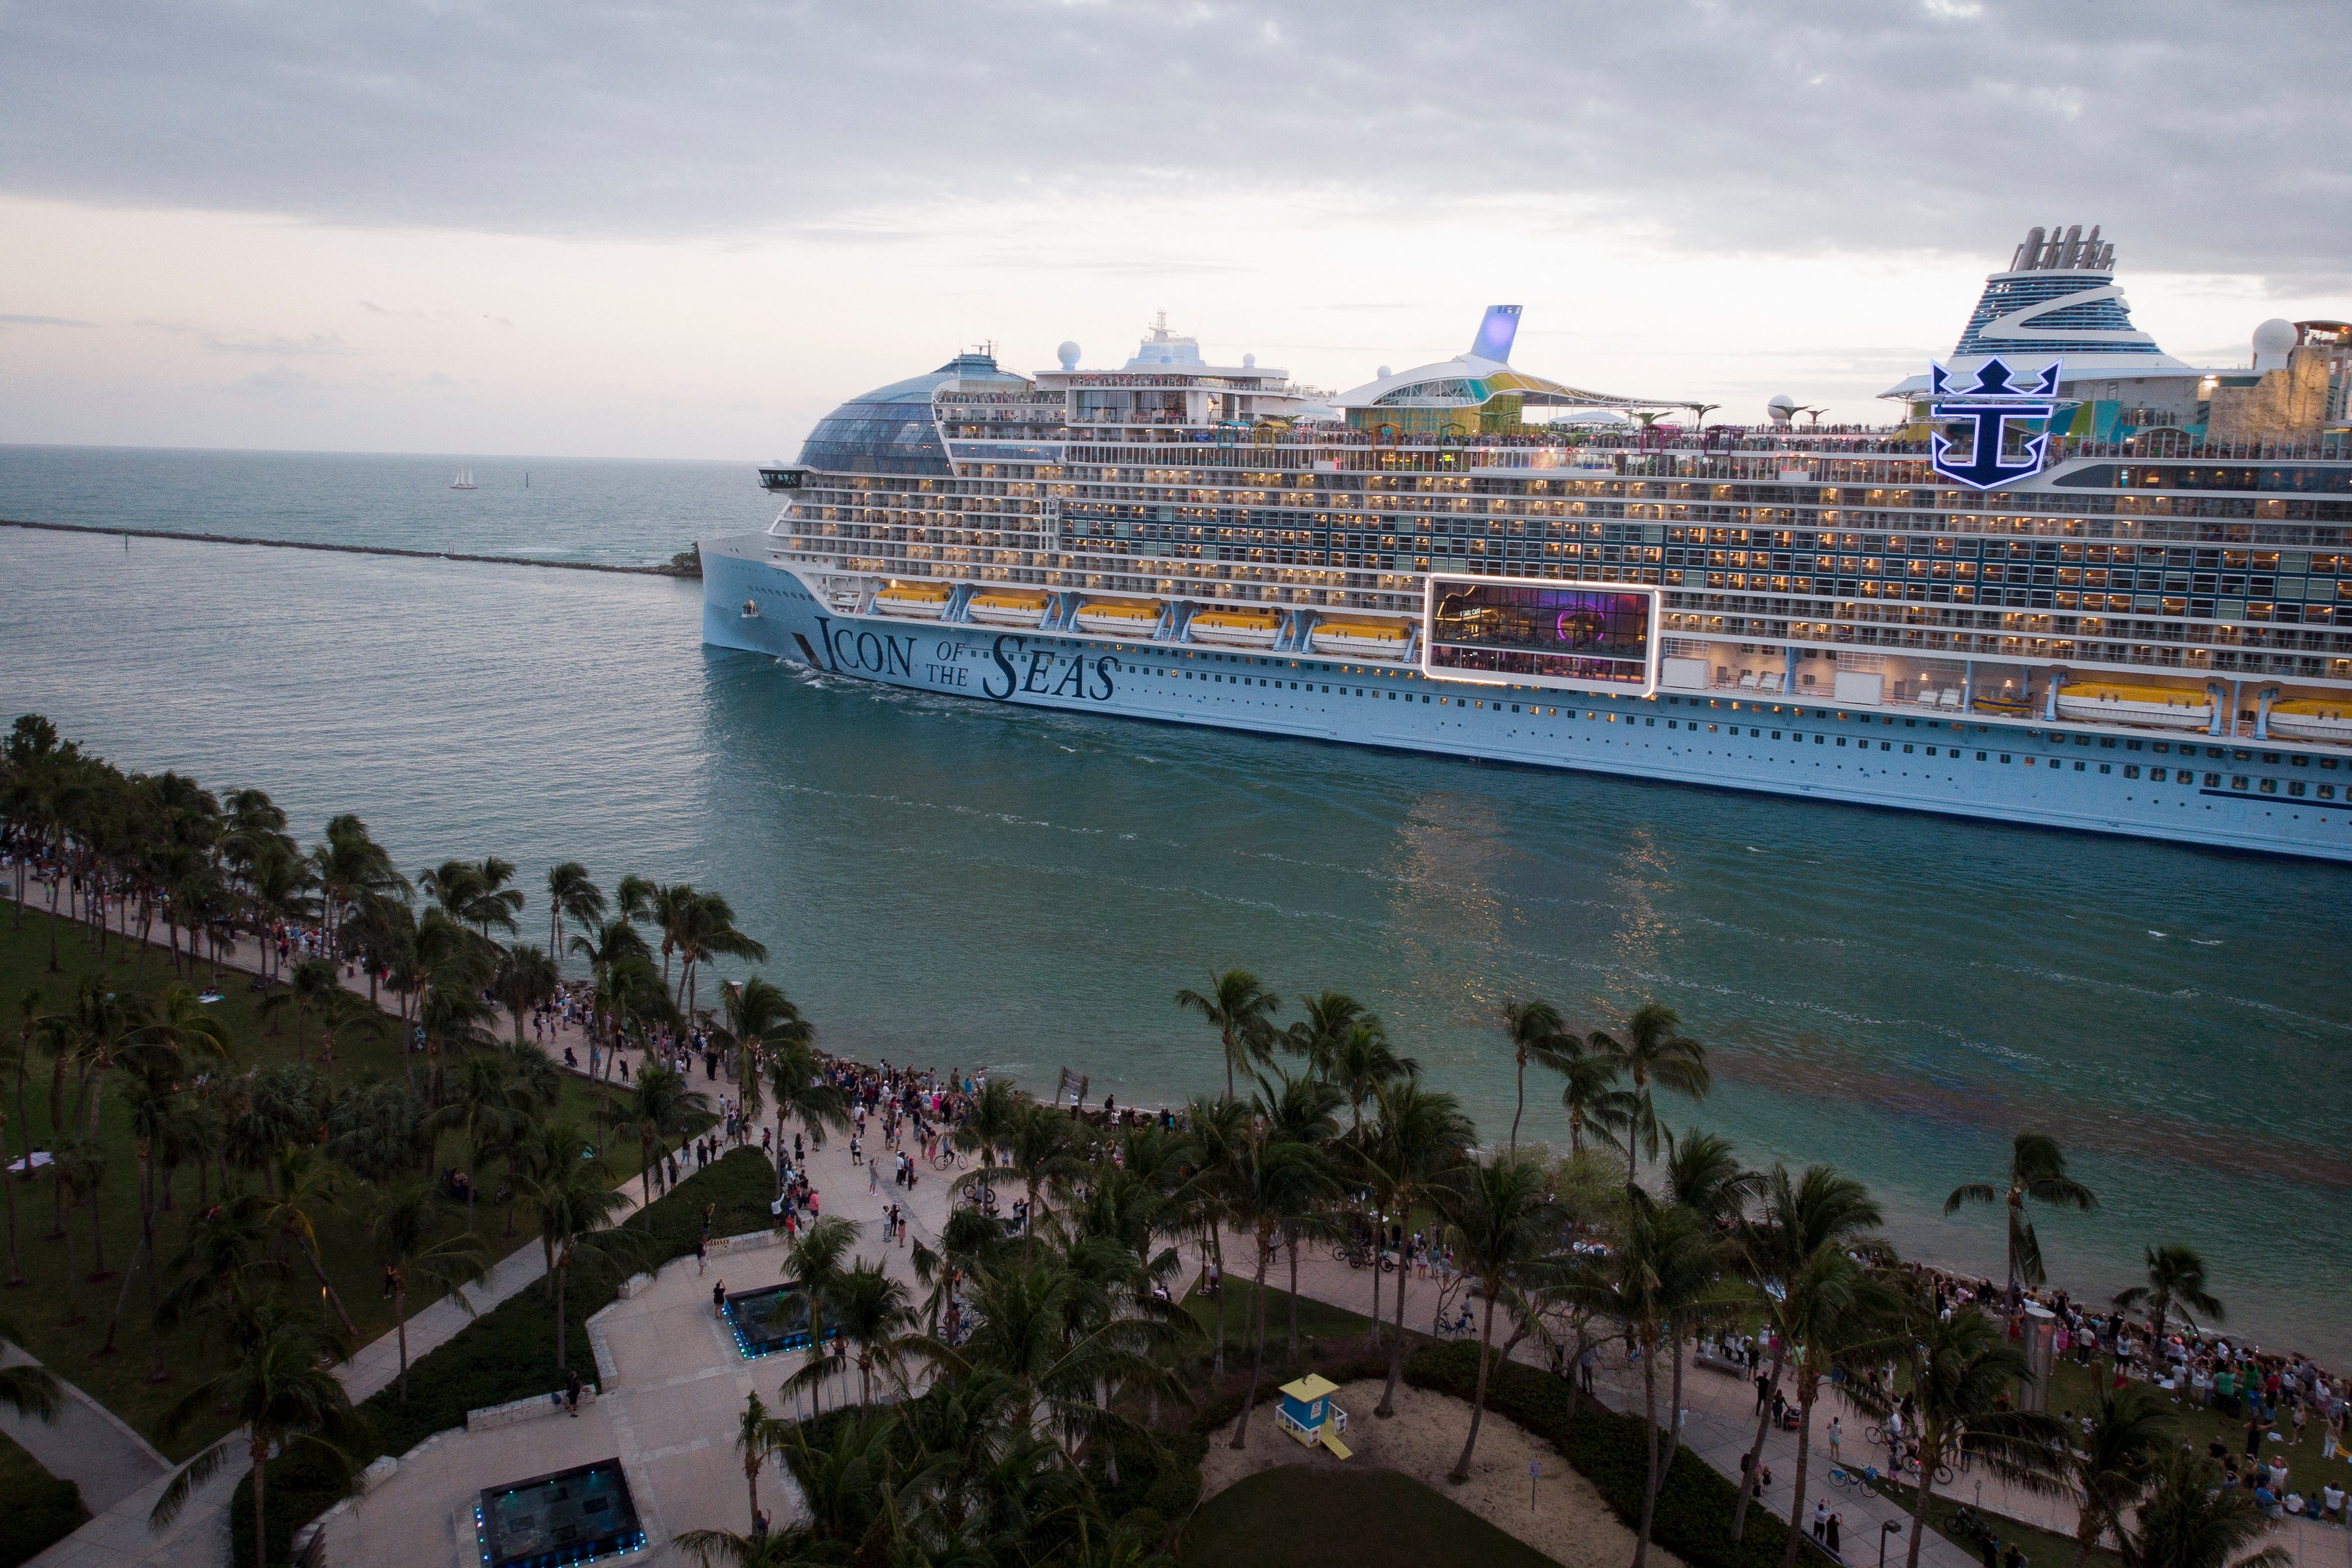 A fire broke out on Royal Caribbean’s “Icon of the Seas,” billed as the world’s largest cruise ship, sails from the Port of Miami on its maiden cruise on January 27